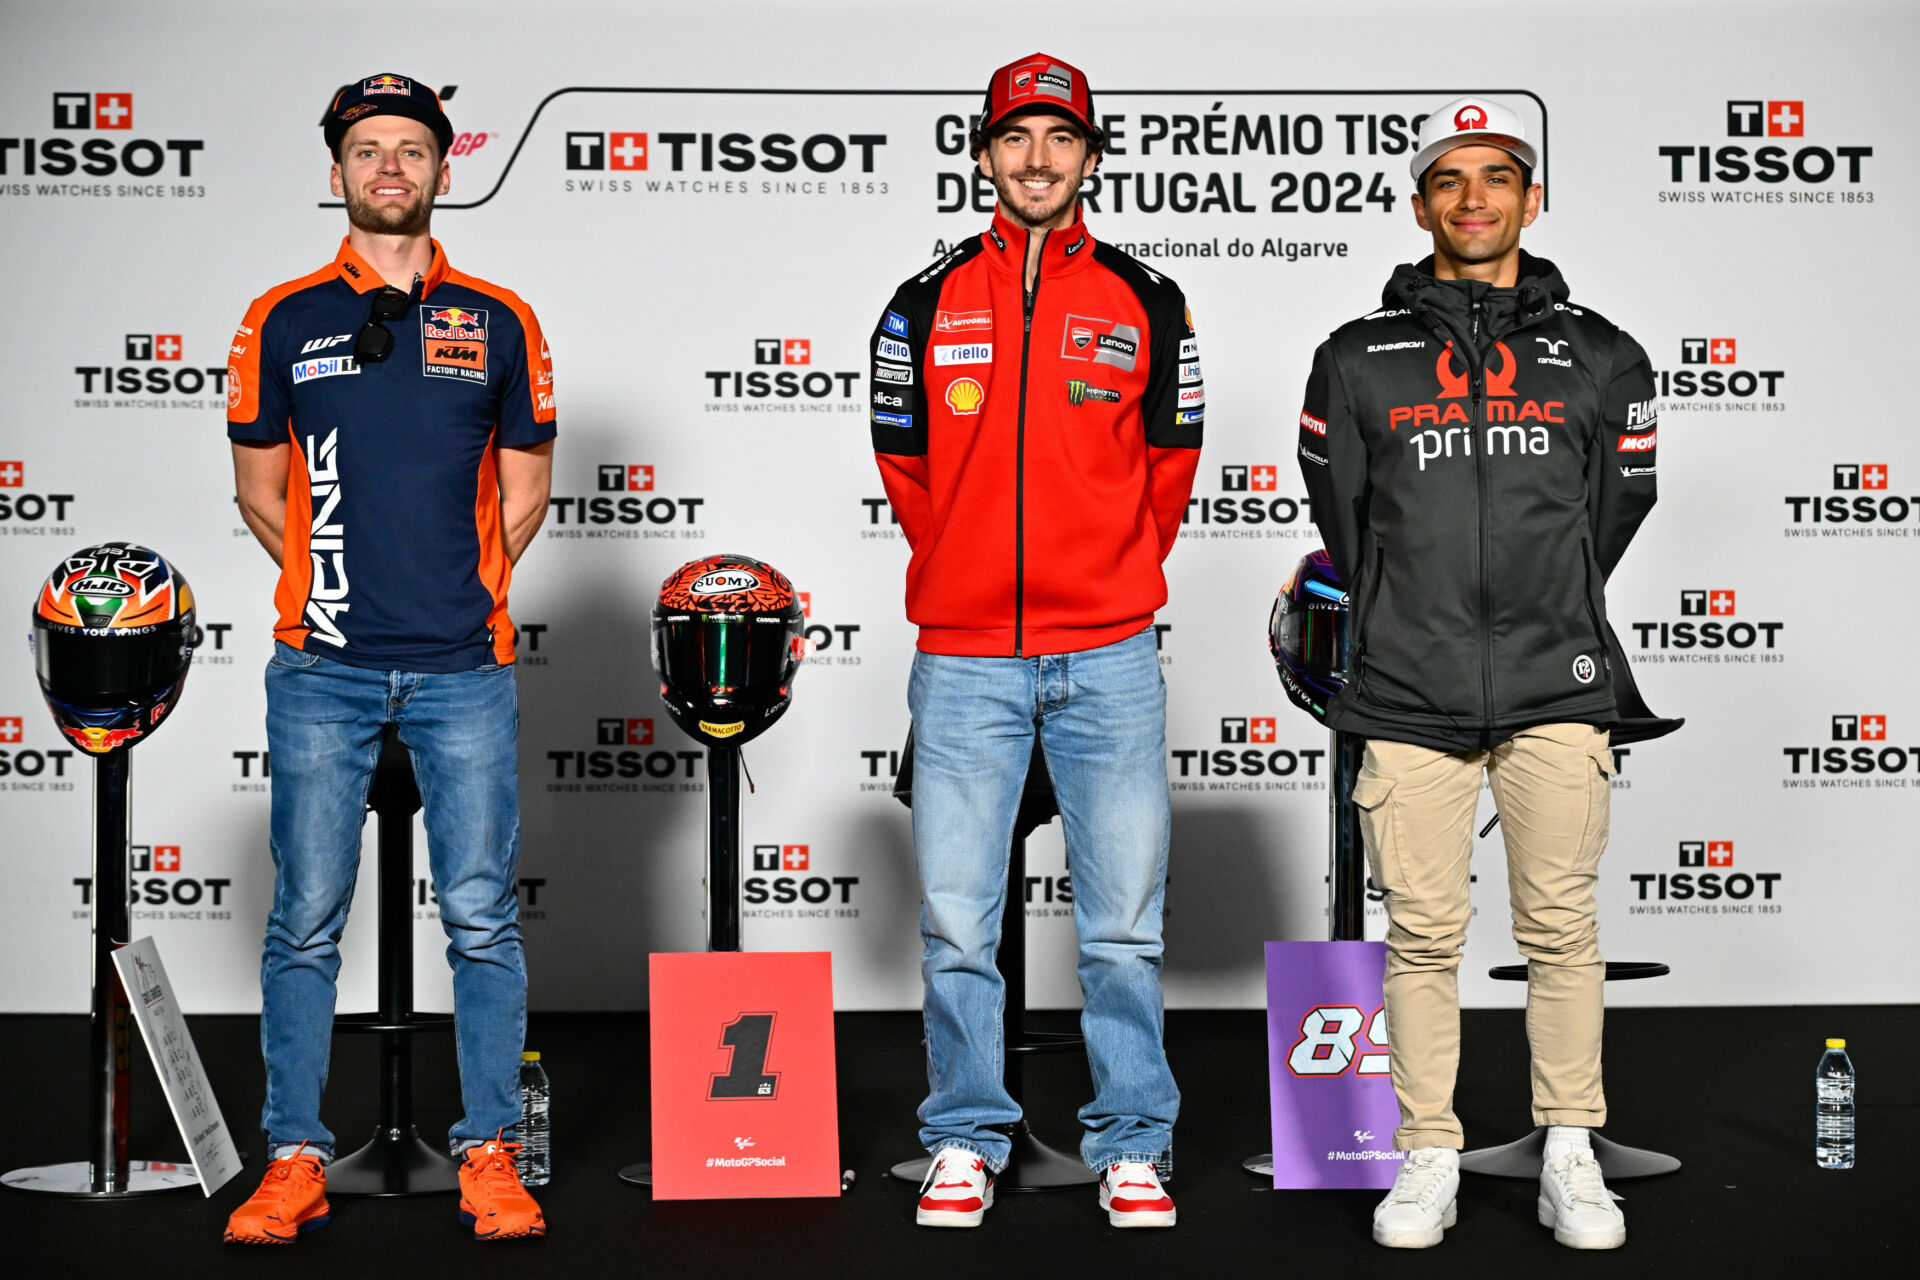 (From left) Brad Binder, Francesco Bagnaia, and Jorge Martin at the MotoGP pre-event press conference in Portugal. Photo courtesy Dorna.